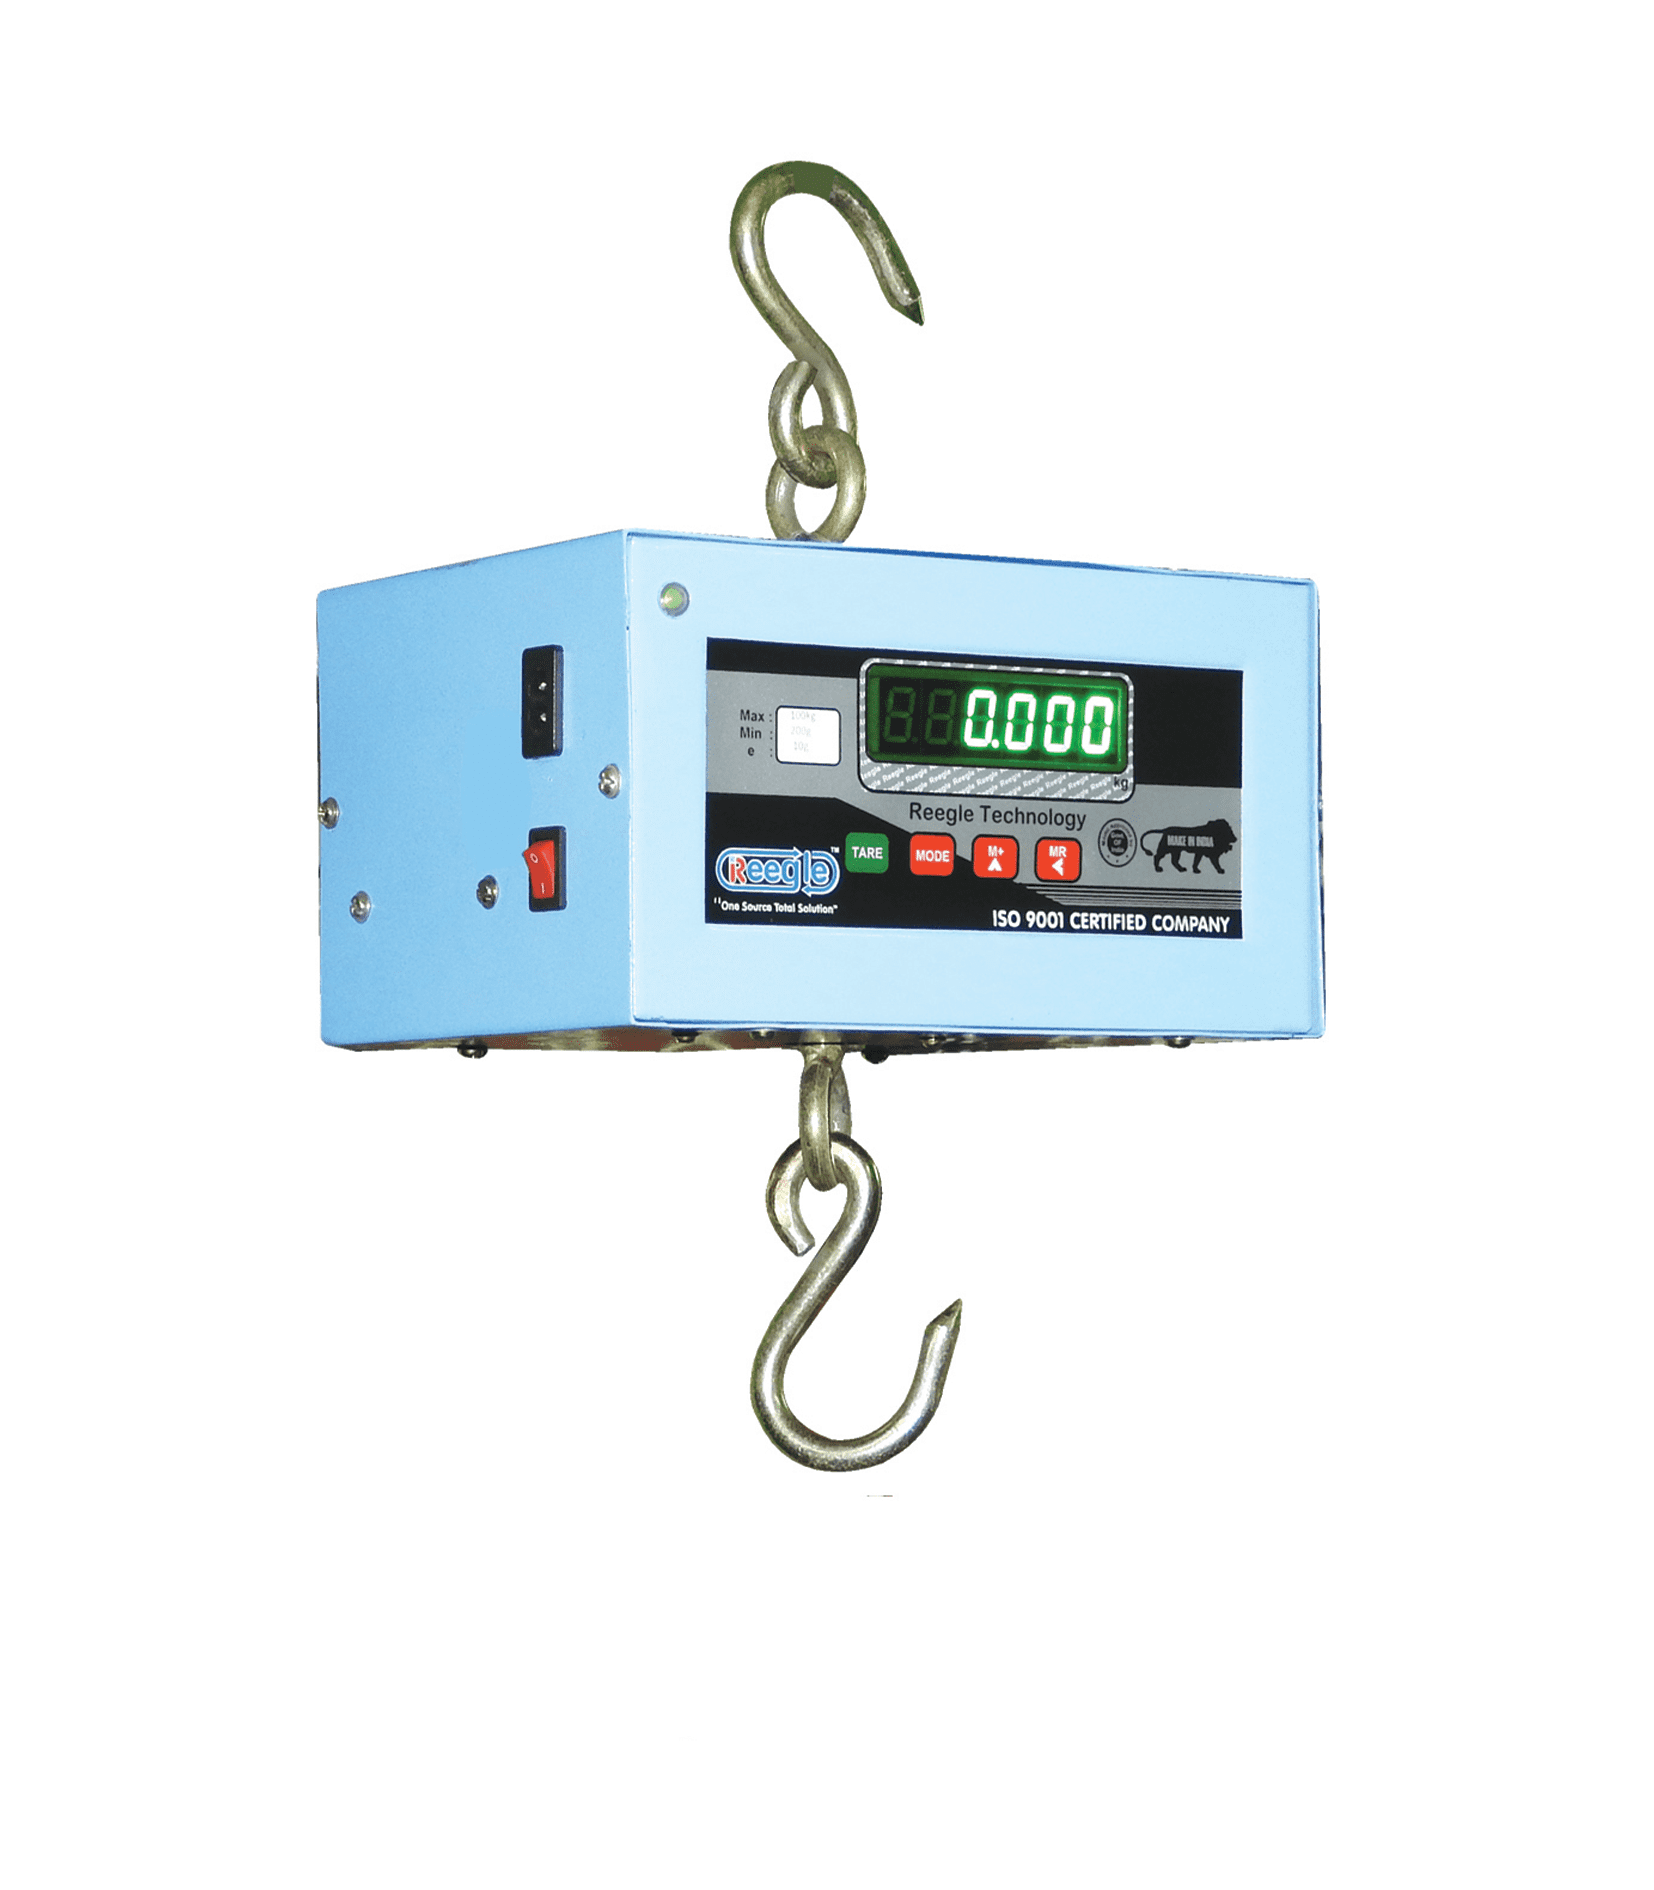 Custom weighing solutions